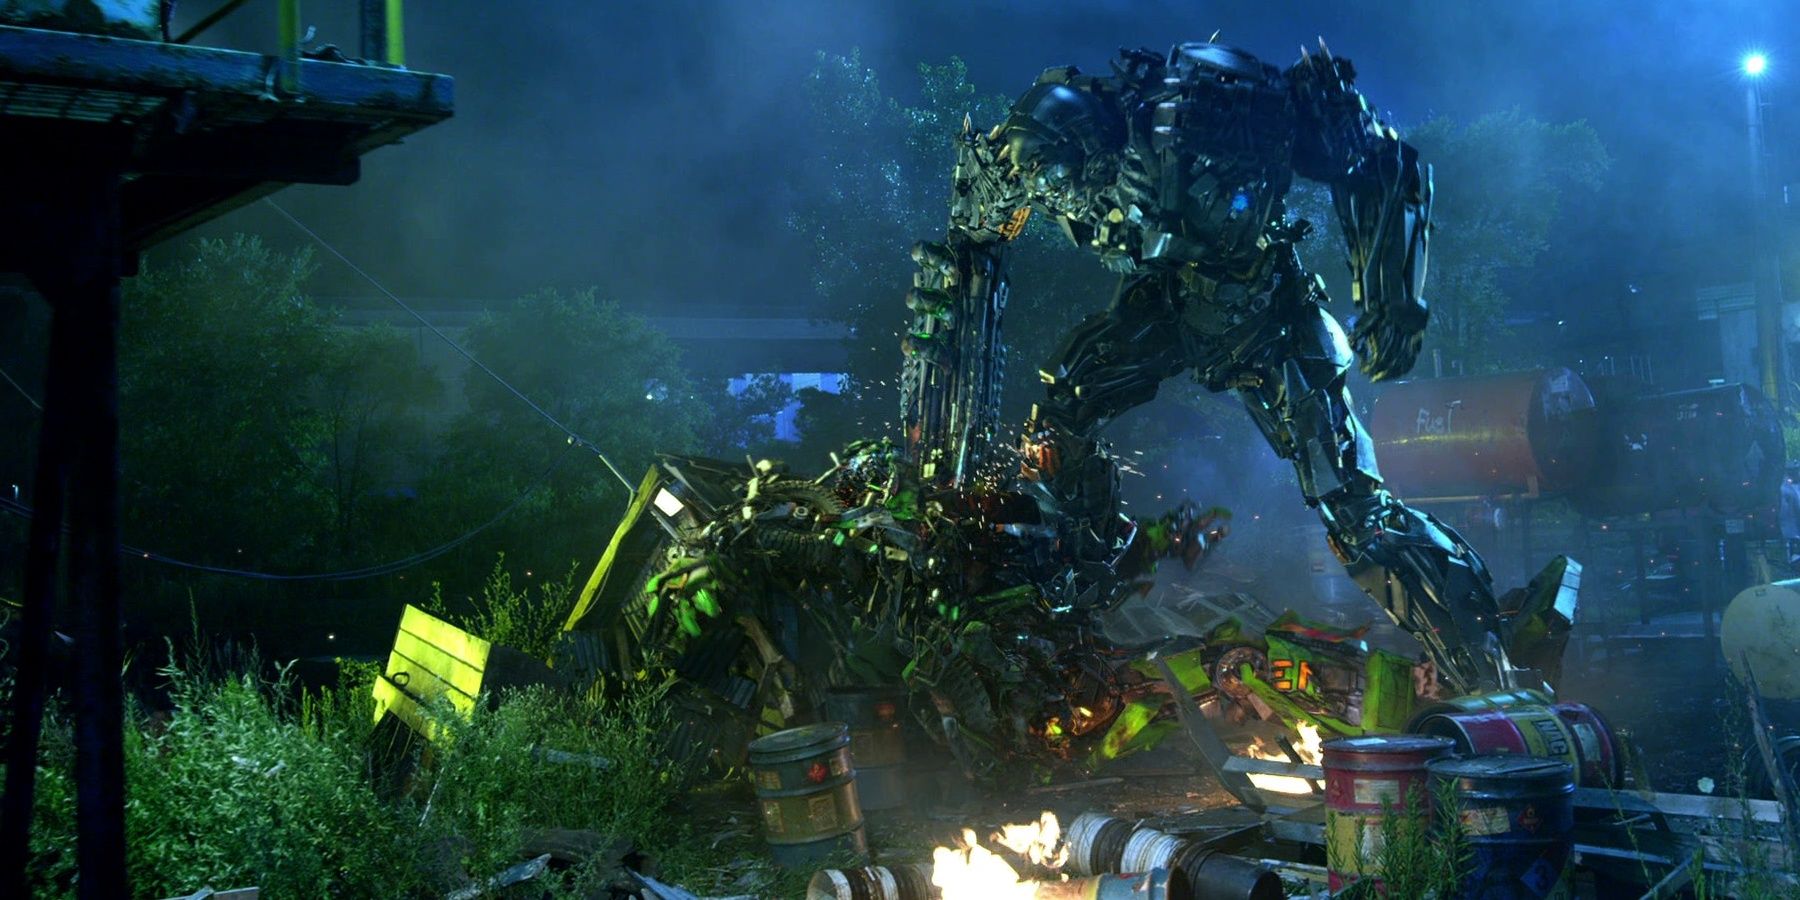 Lockdown ripping out Ratchet's spark in Transformers: Age of Extinction